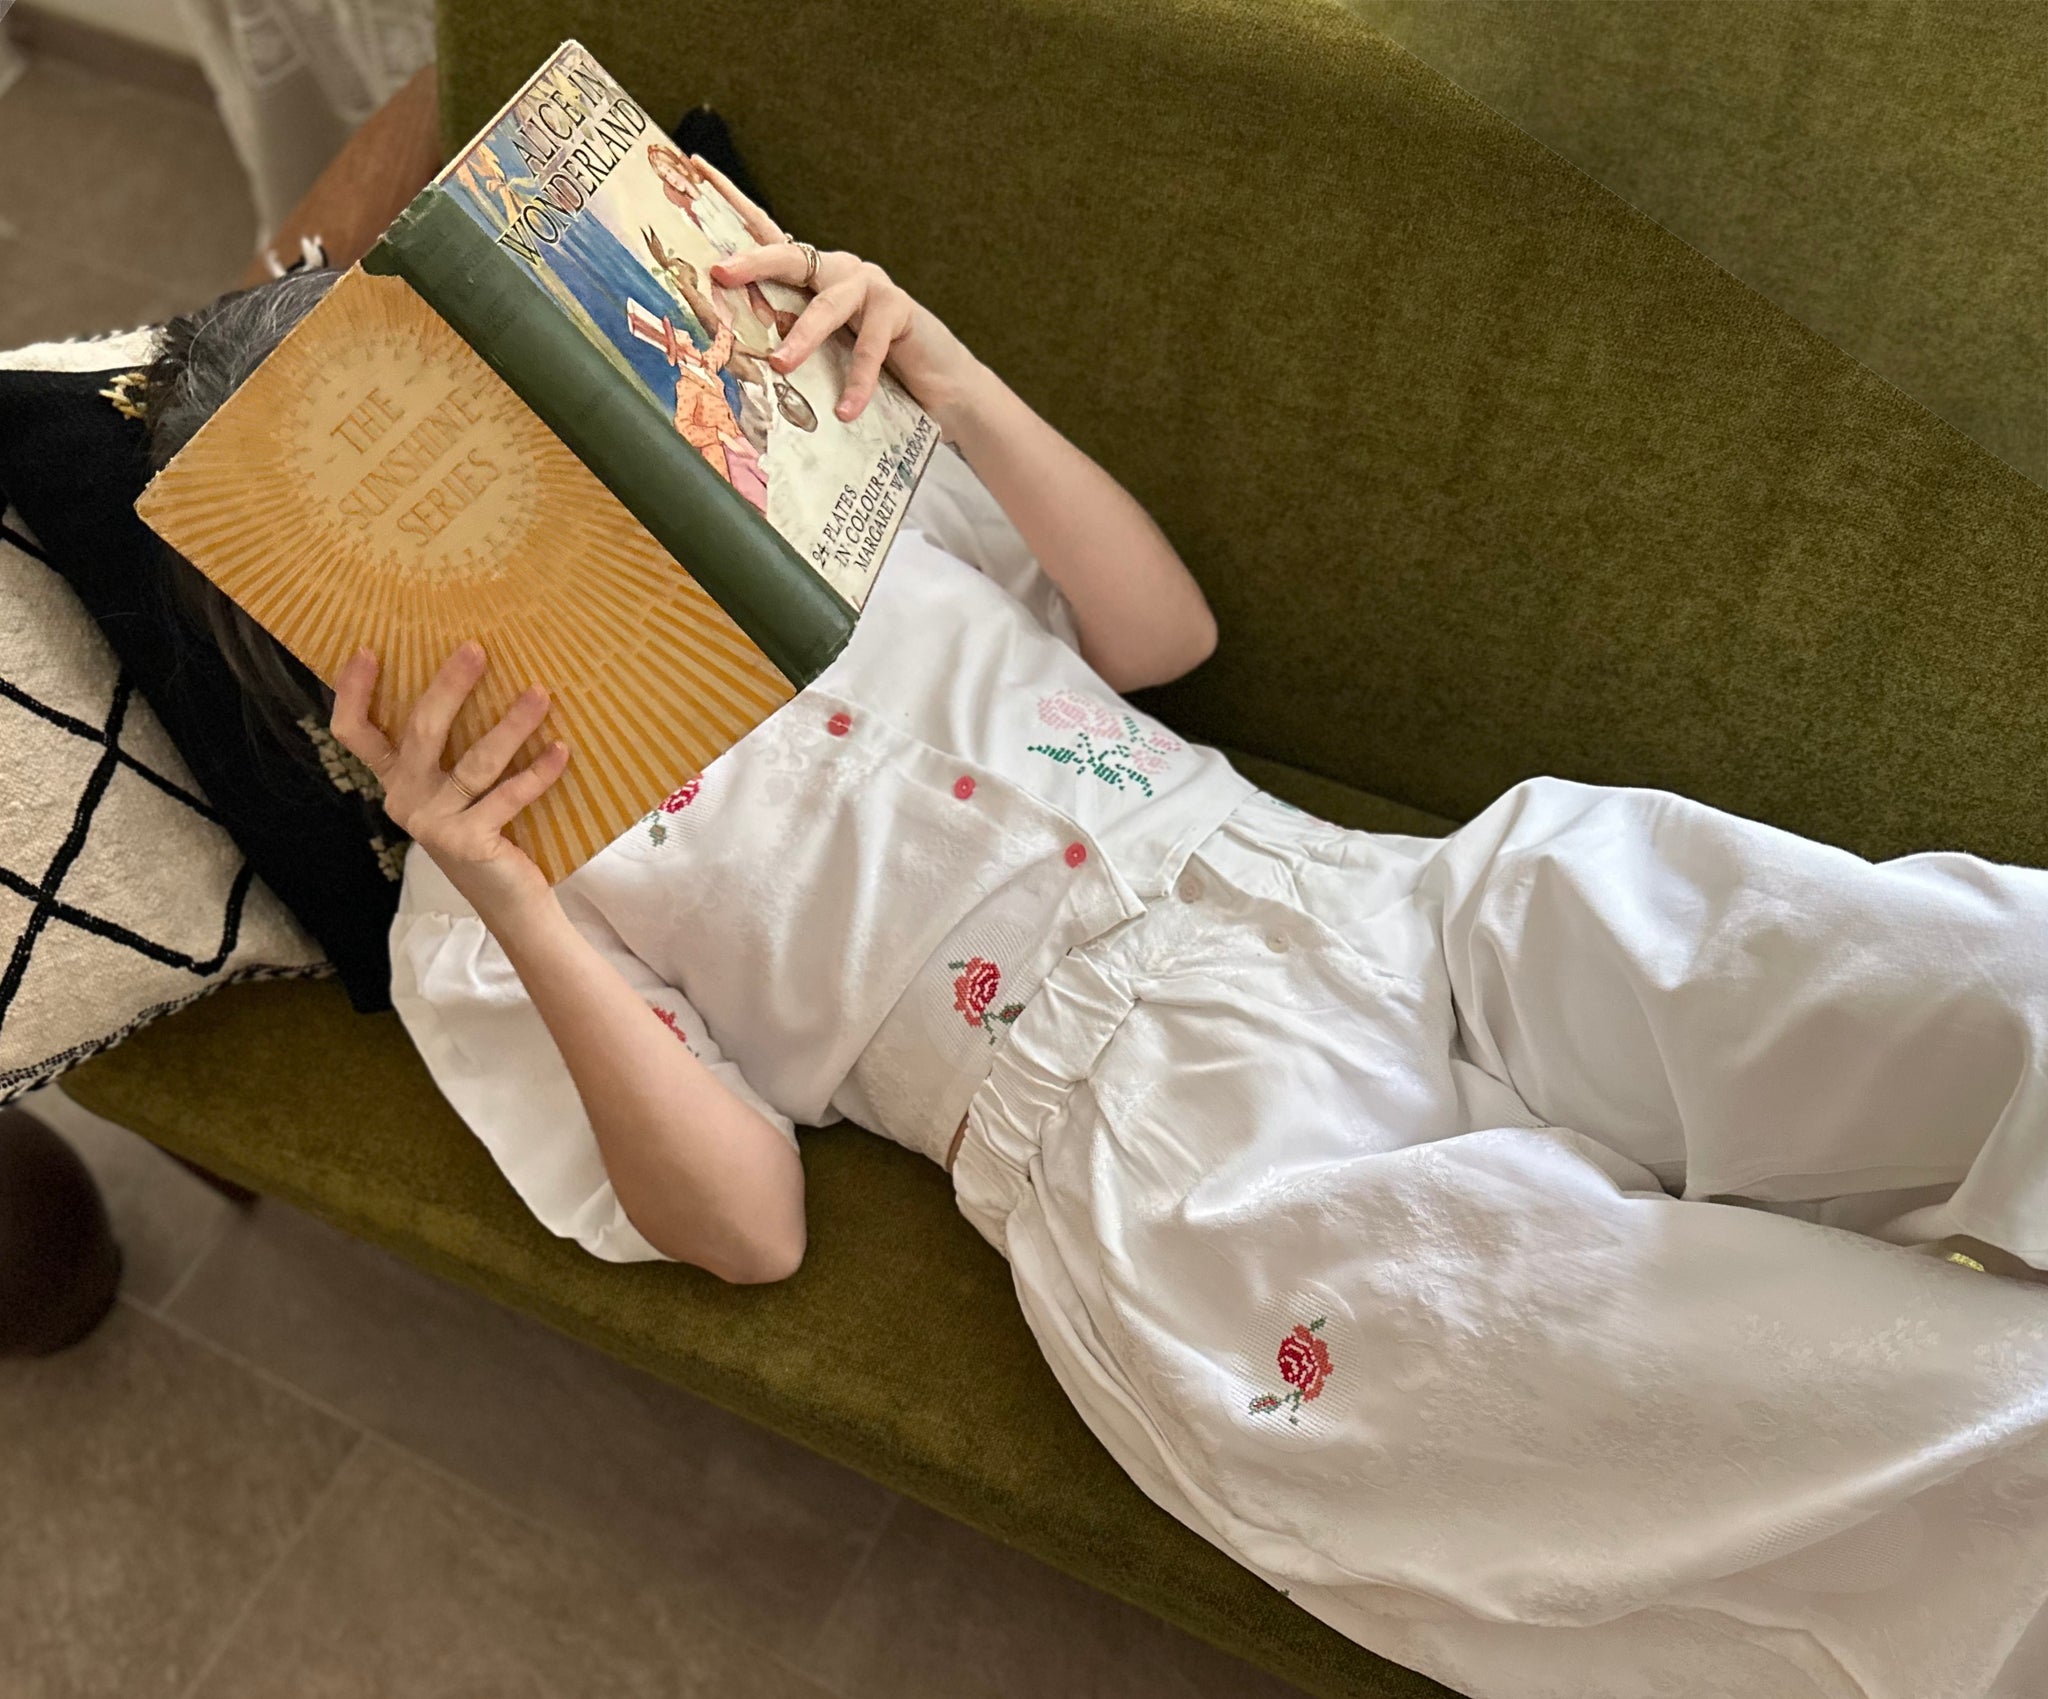 Vicki is lying on a green couch reading a large book, wearing a upcycled tablecloth co-ord set.